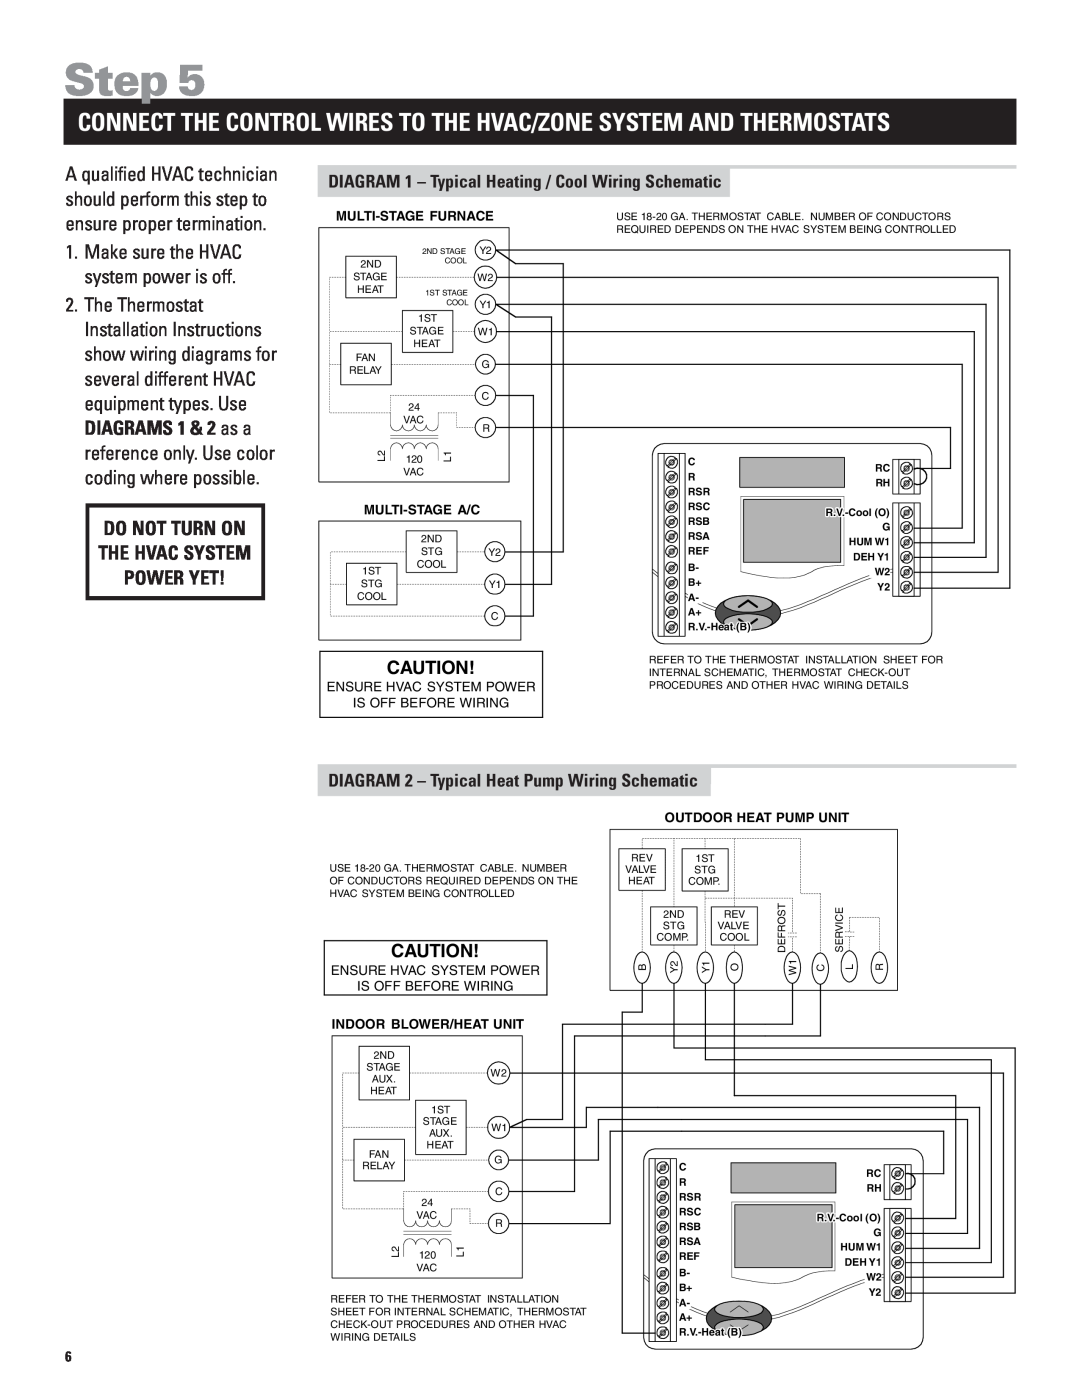 Echo 8870 installation manual Connect The Control Wires To The Hvac/Zone System And Thermostats, Step 